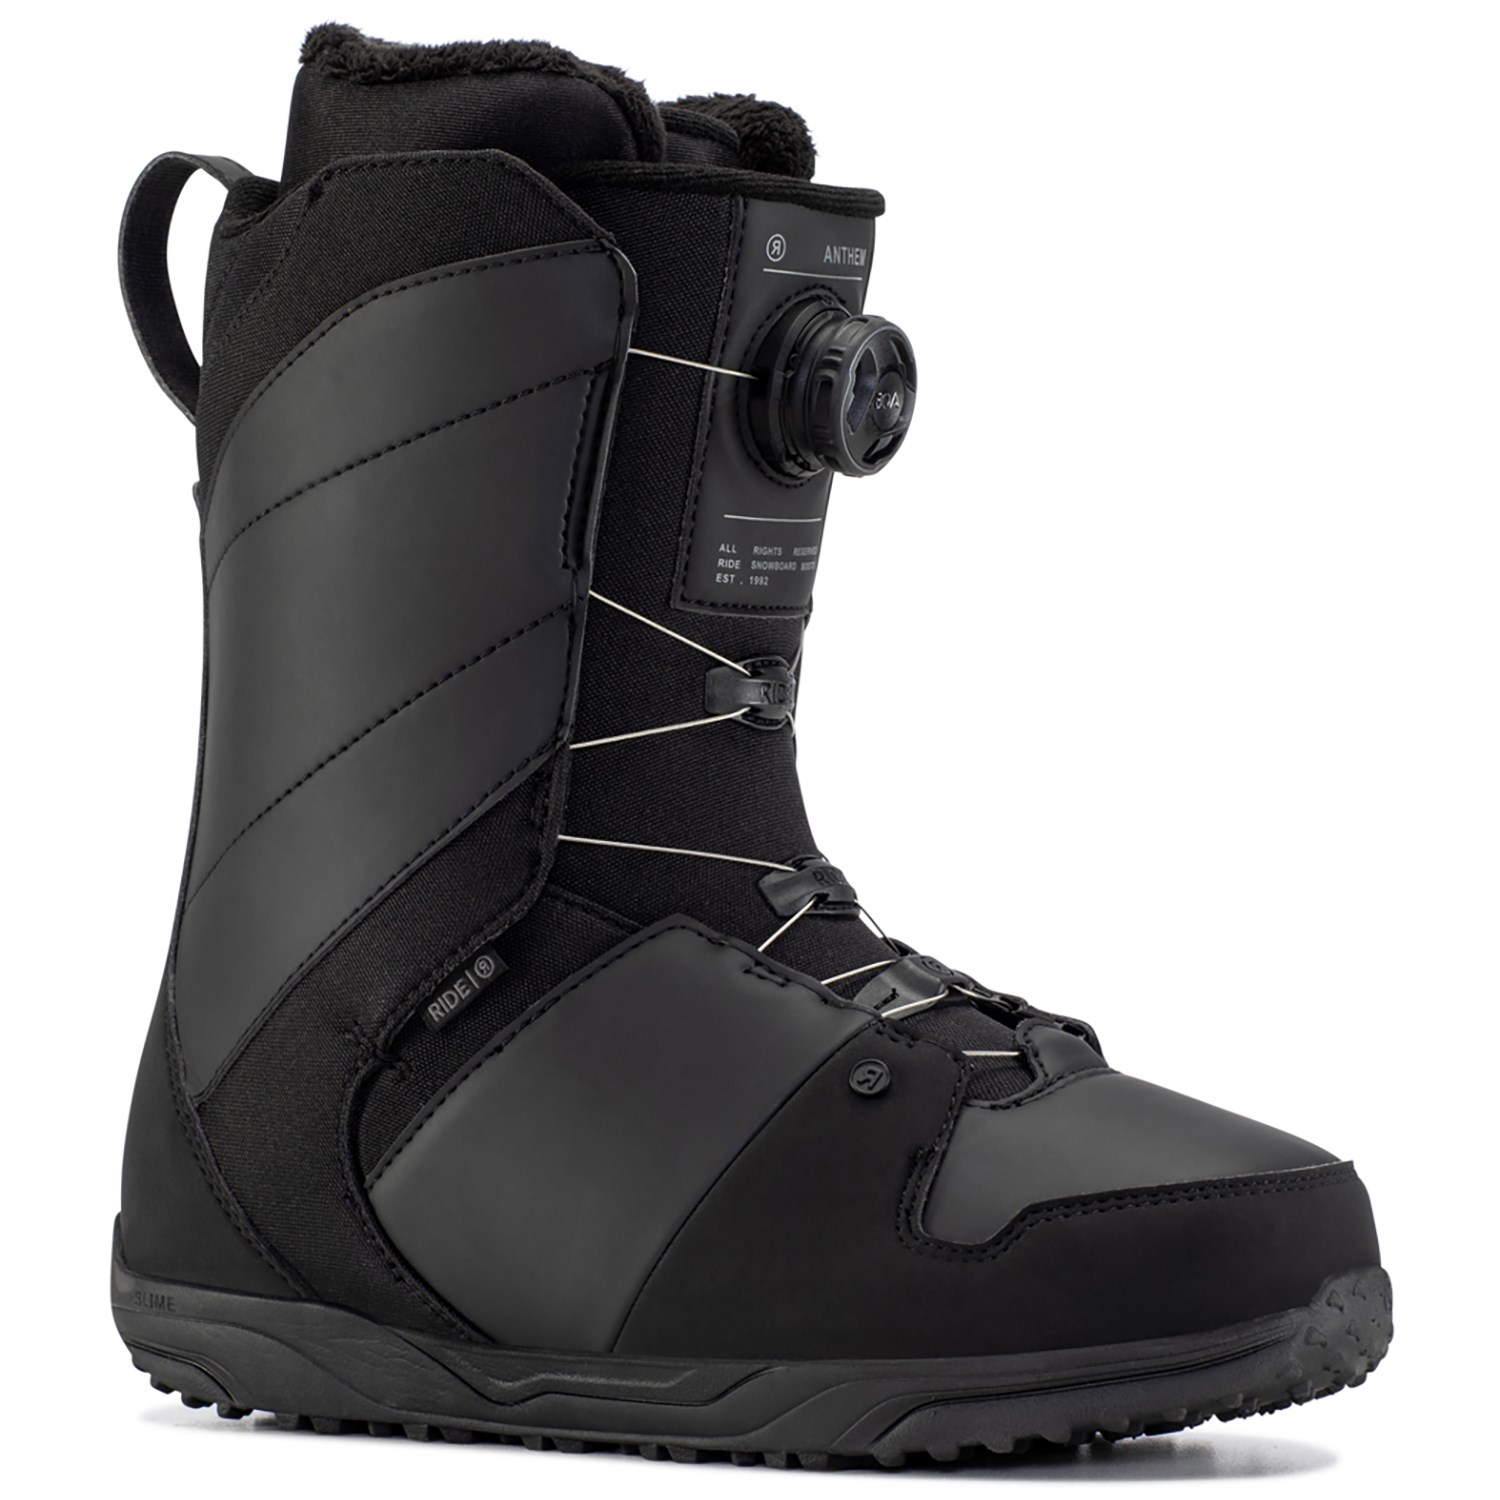 RIDE snowboard boots